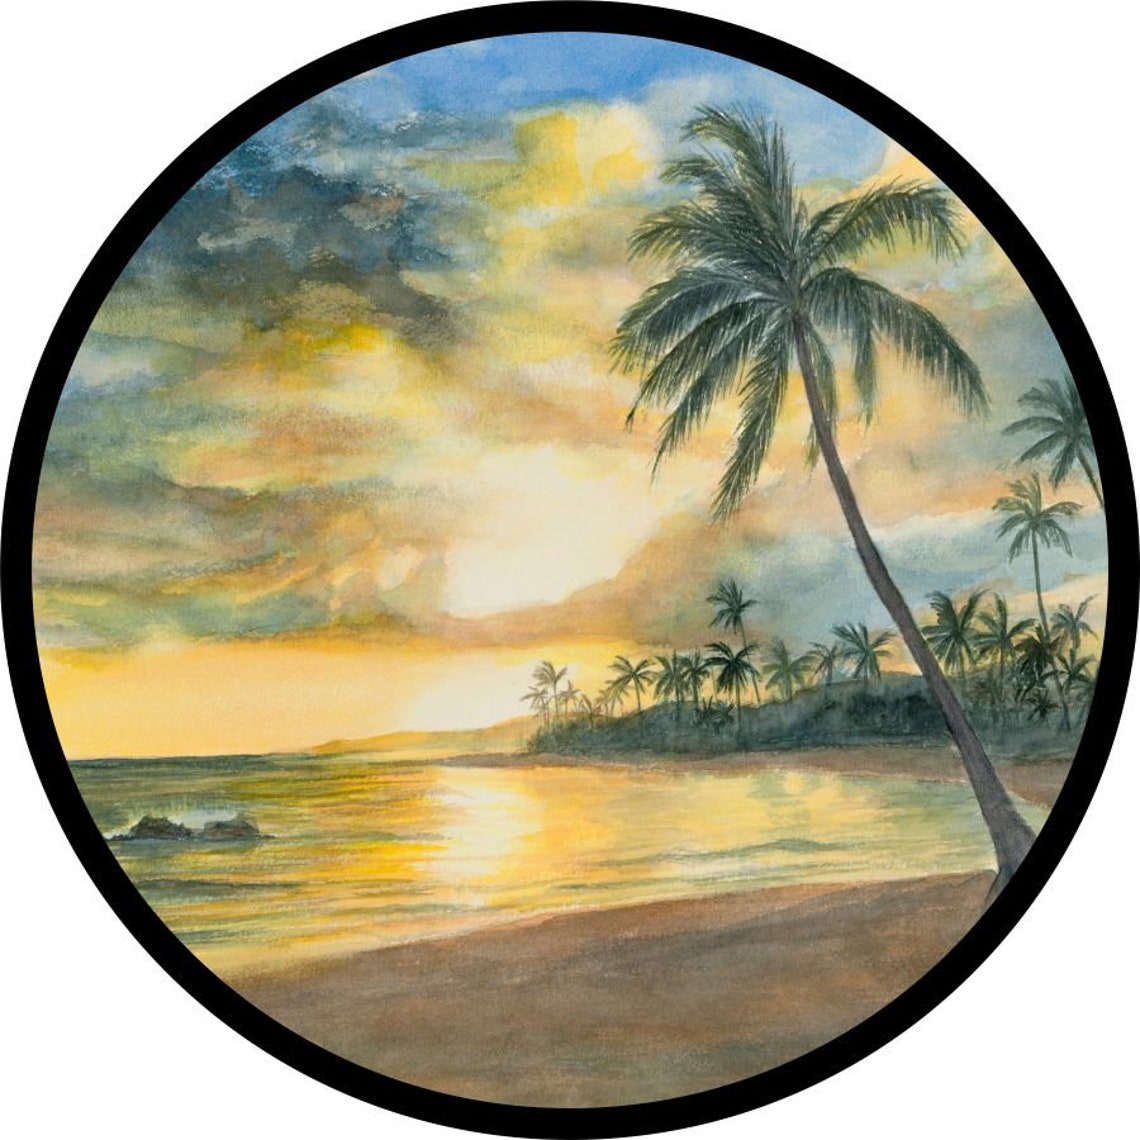 Print of a Painted Sunset Scene